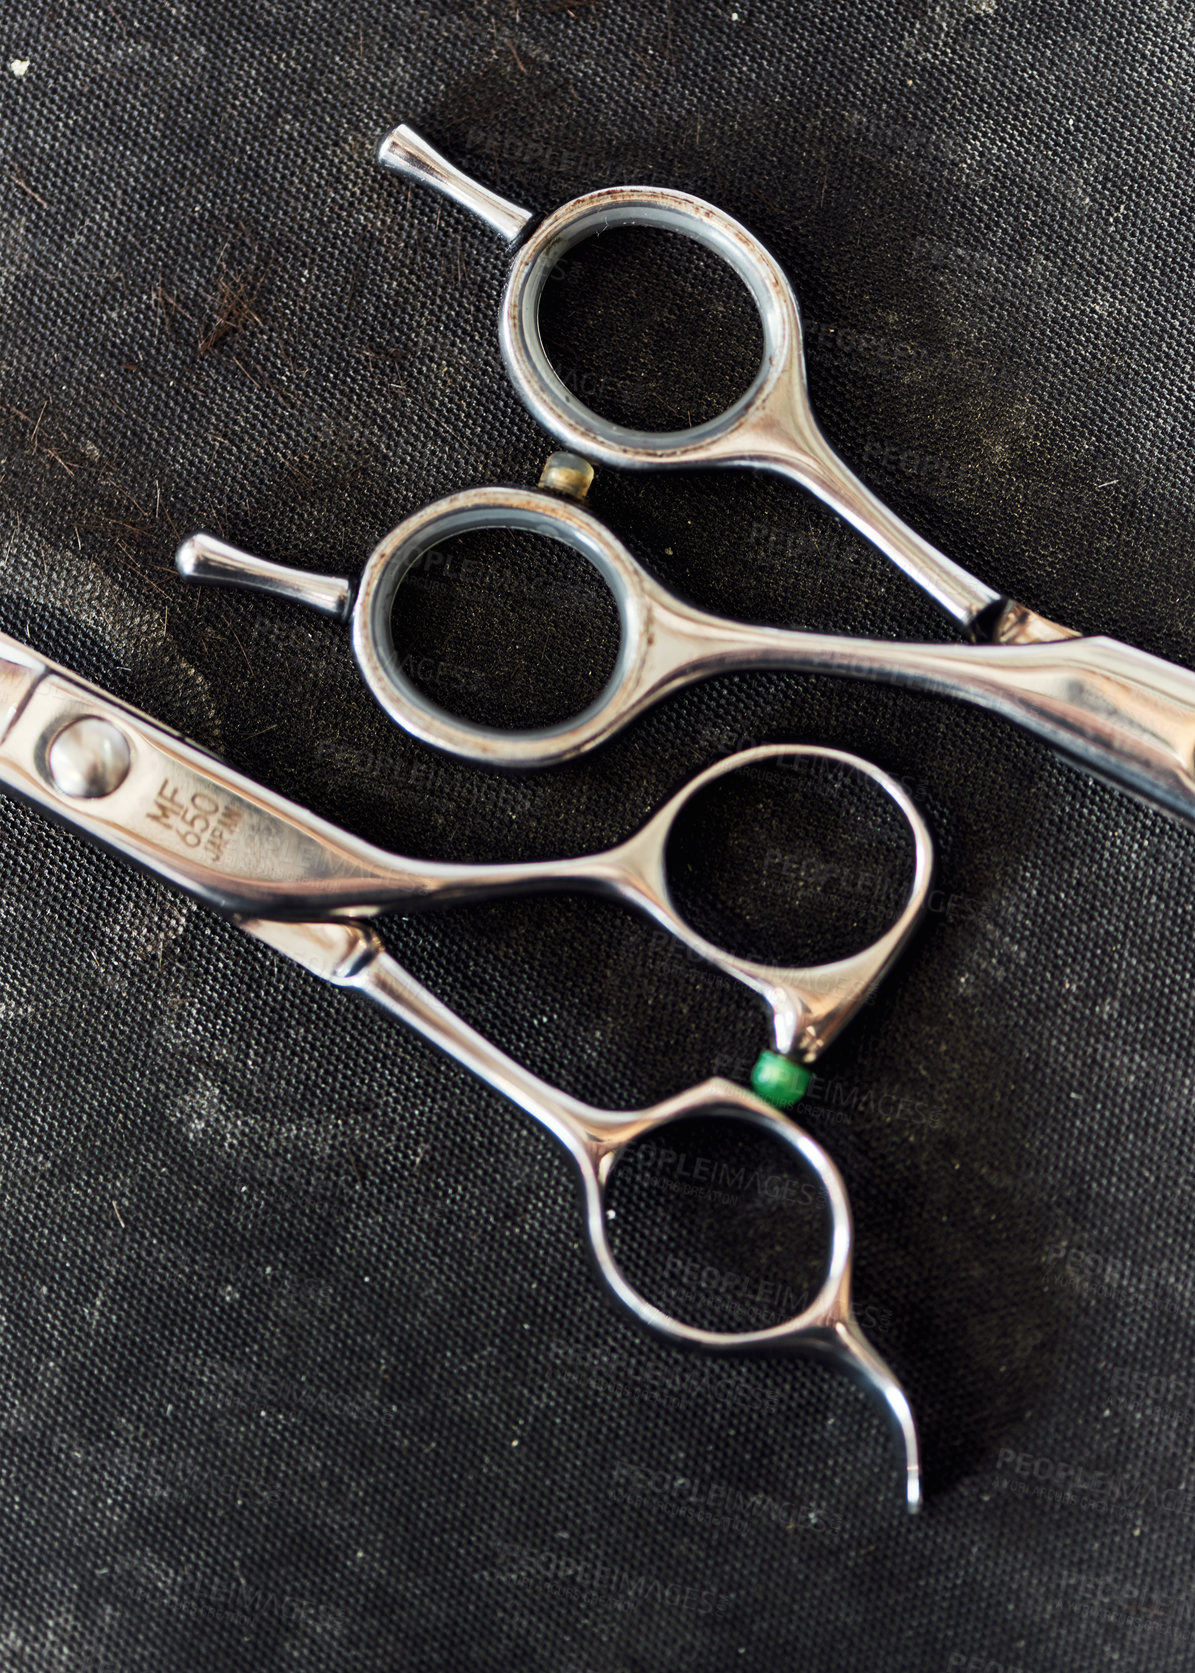 Buy stock photo Still life shot of a set of shear scissors used for trimming hair inside a barbershop